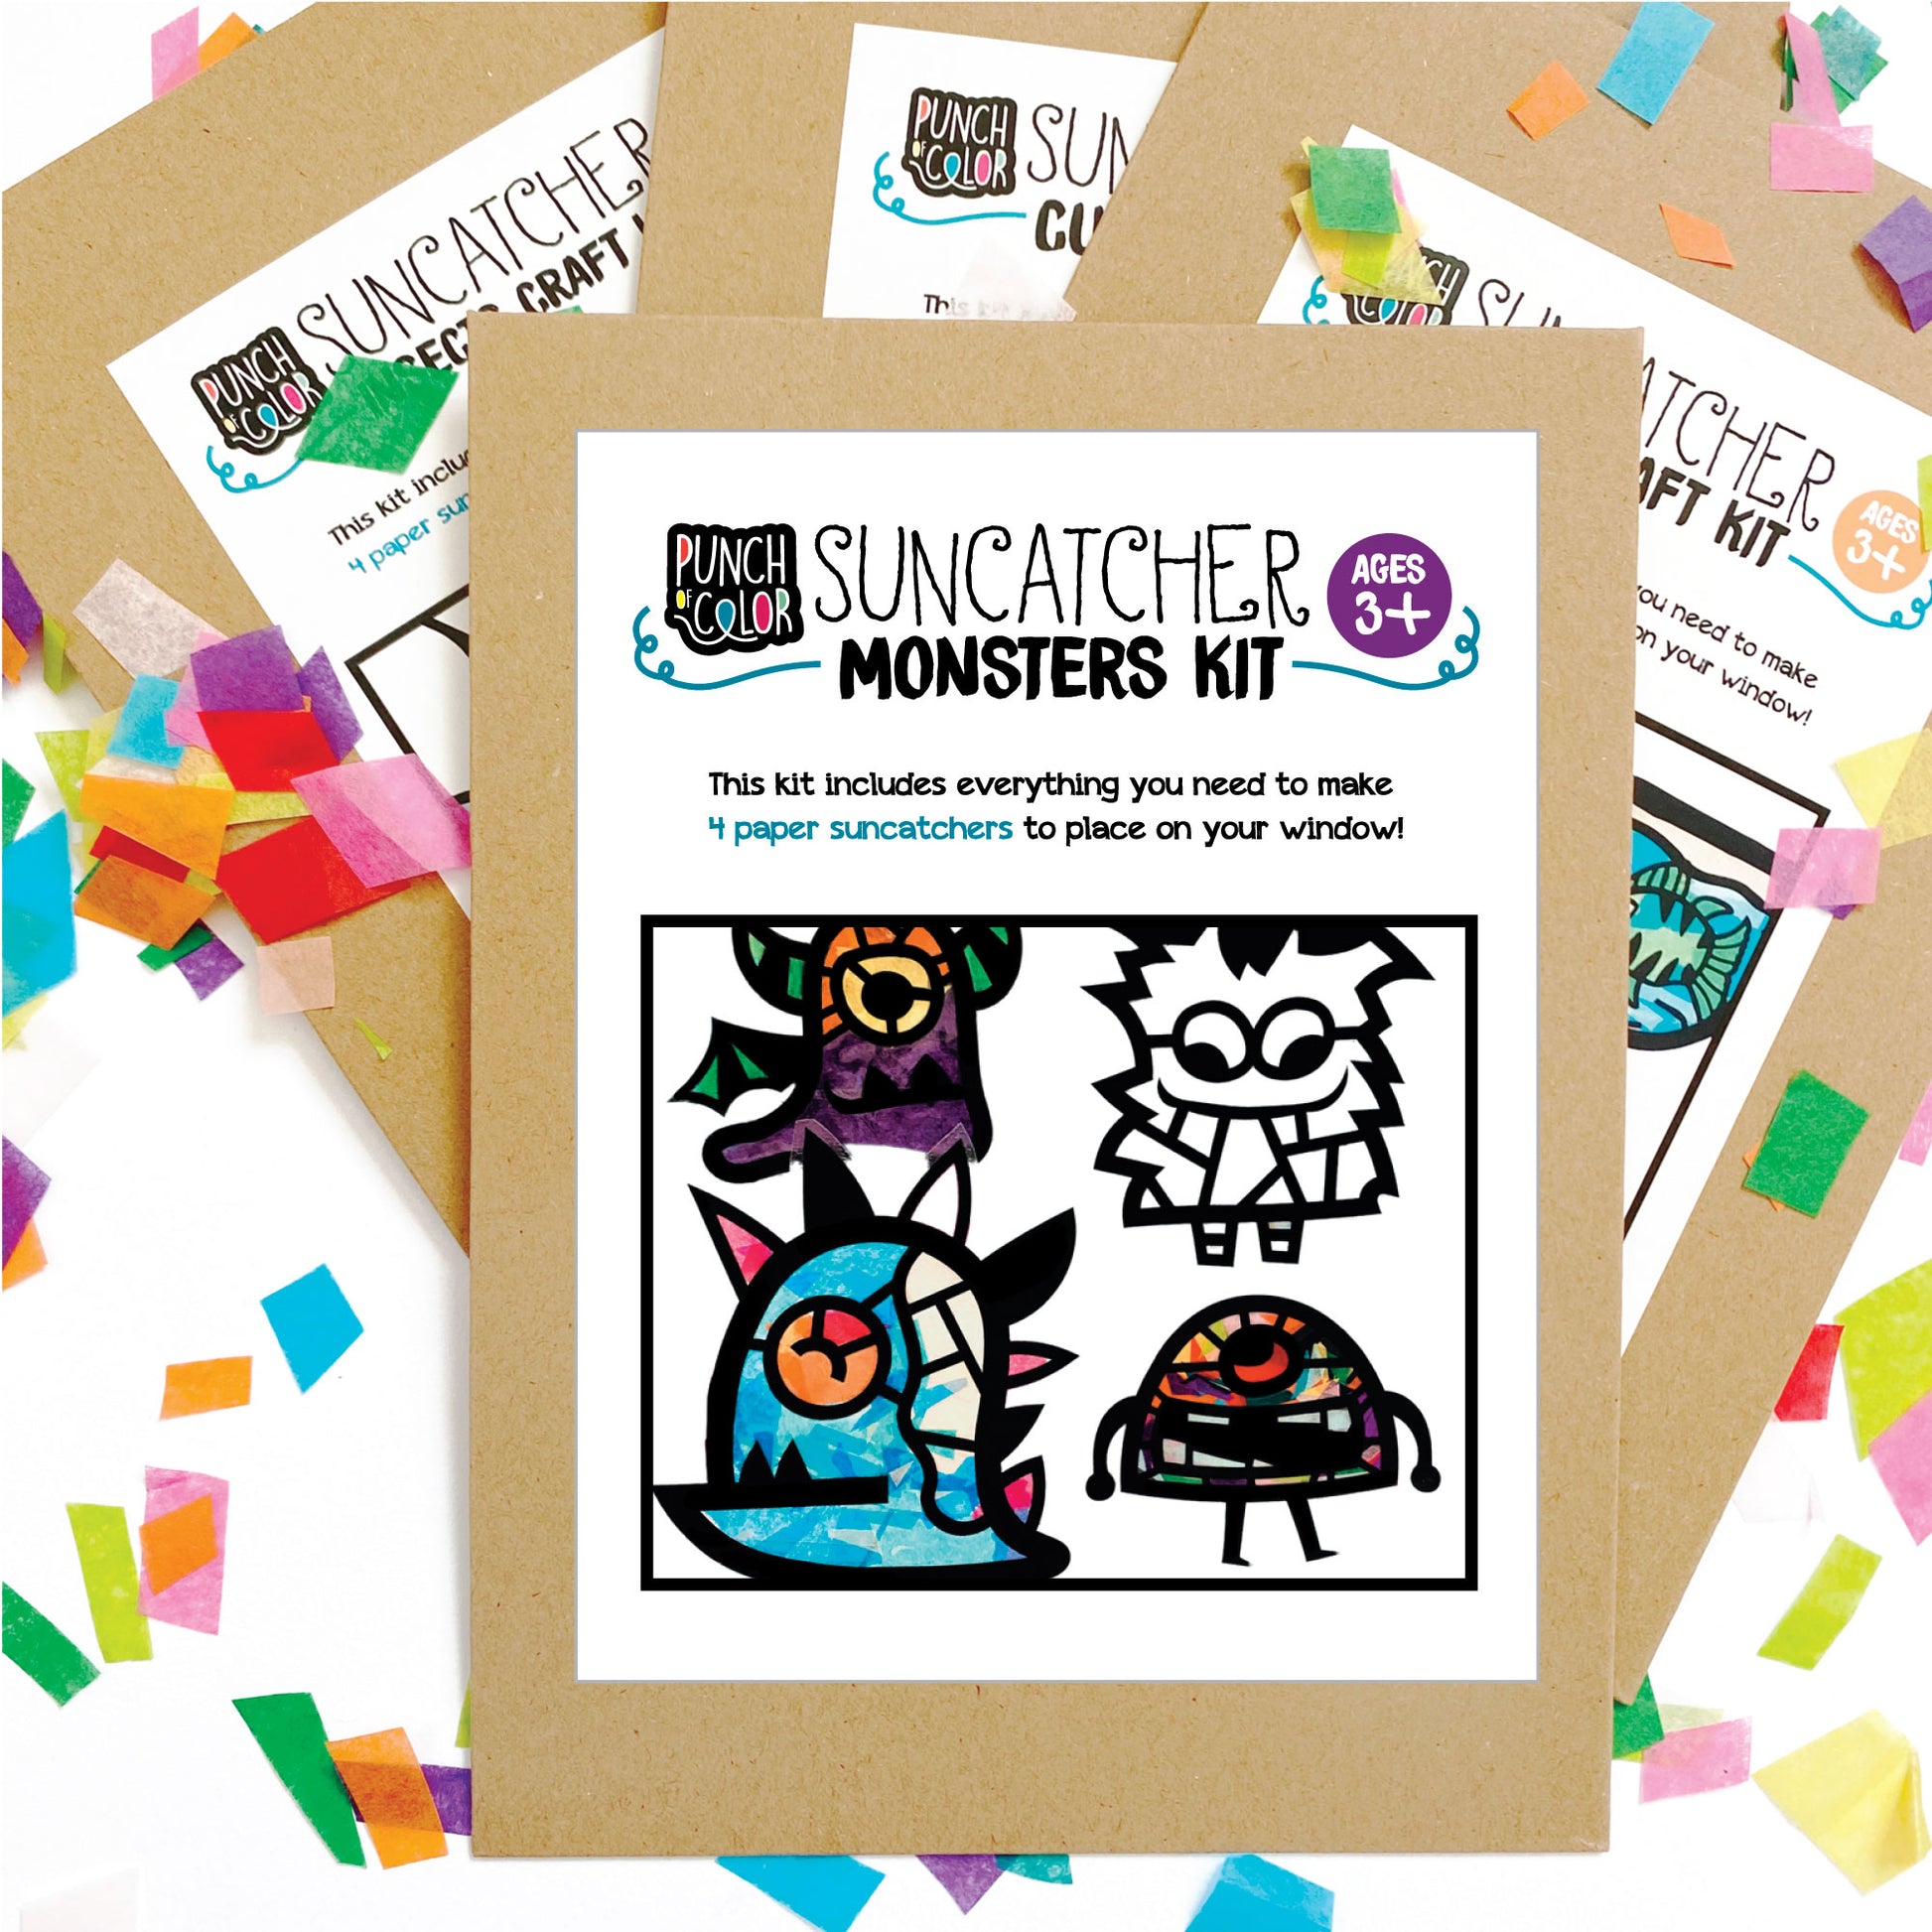 Paper monsters arts and crafts suncatcher activity for kids